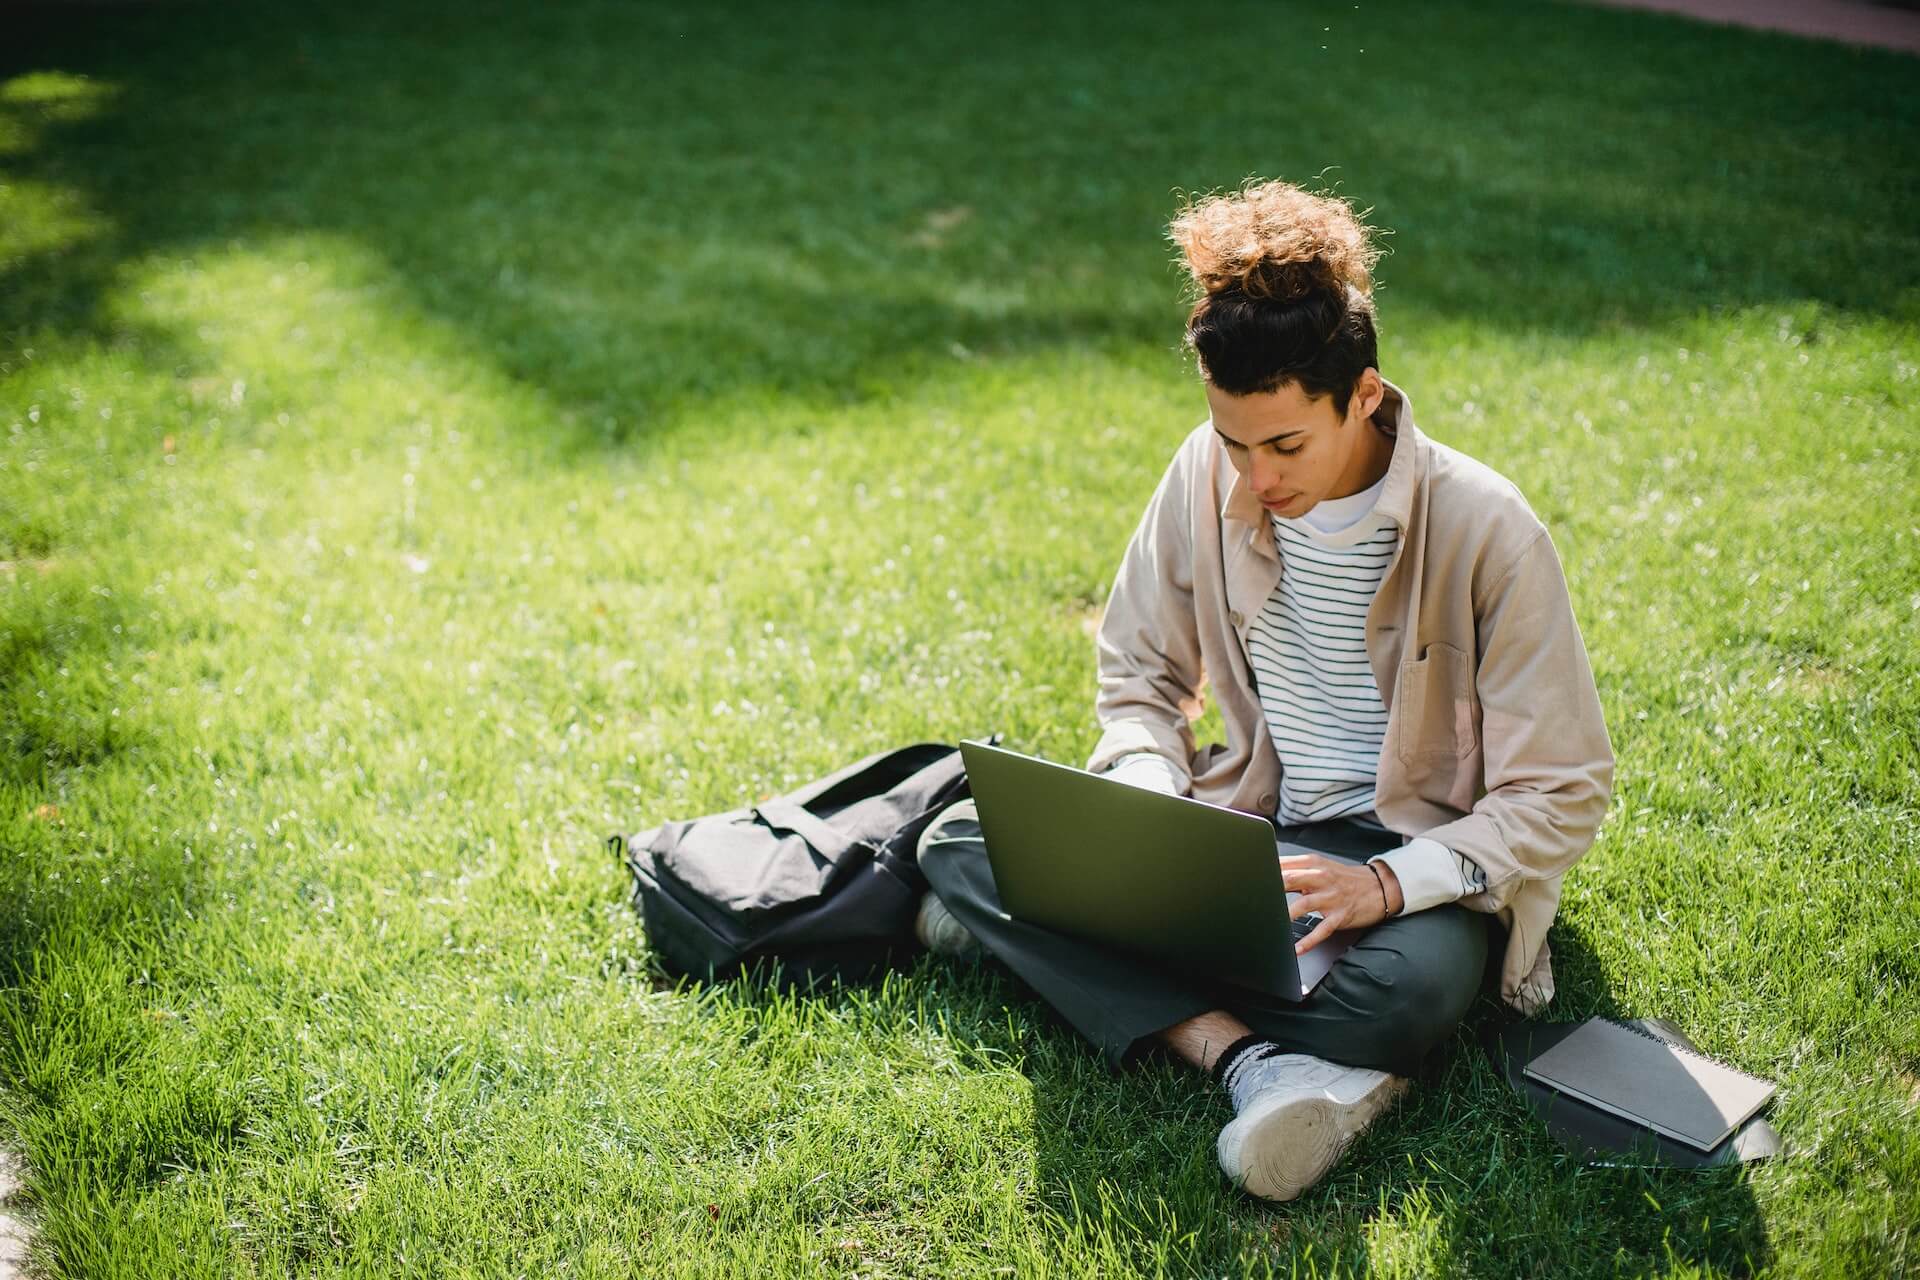 College student sitting on the lawn and looking at his laptop